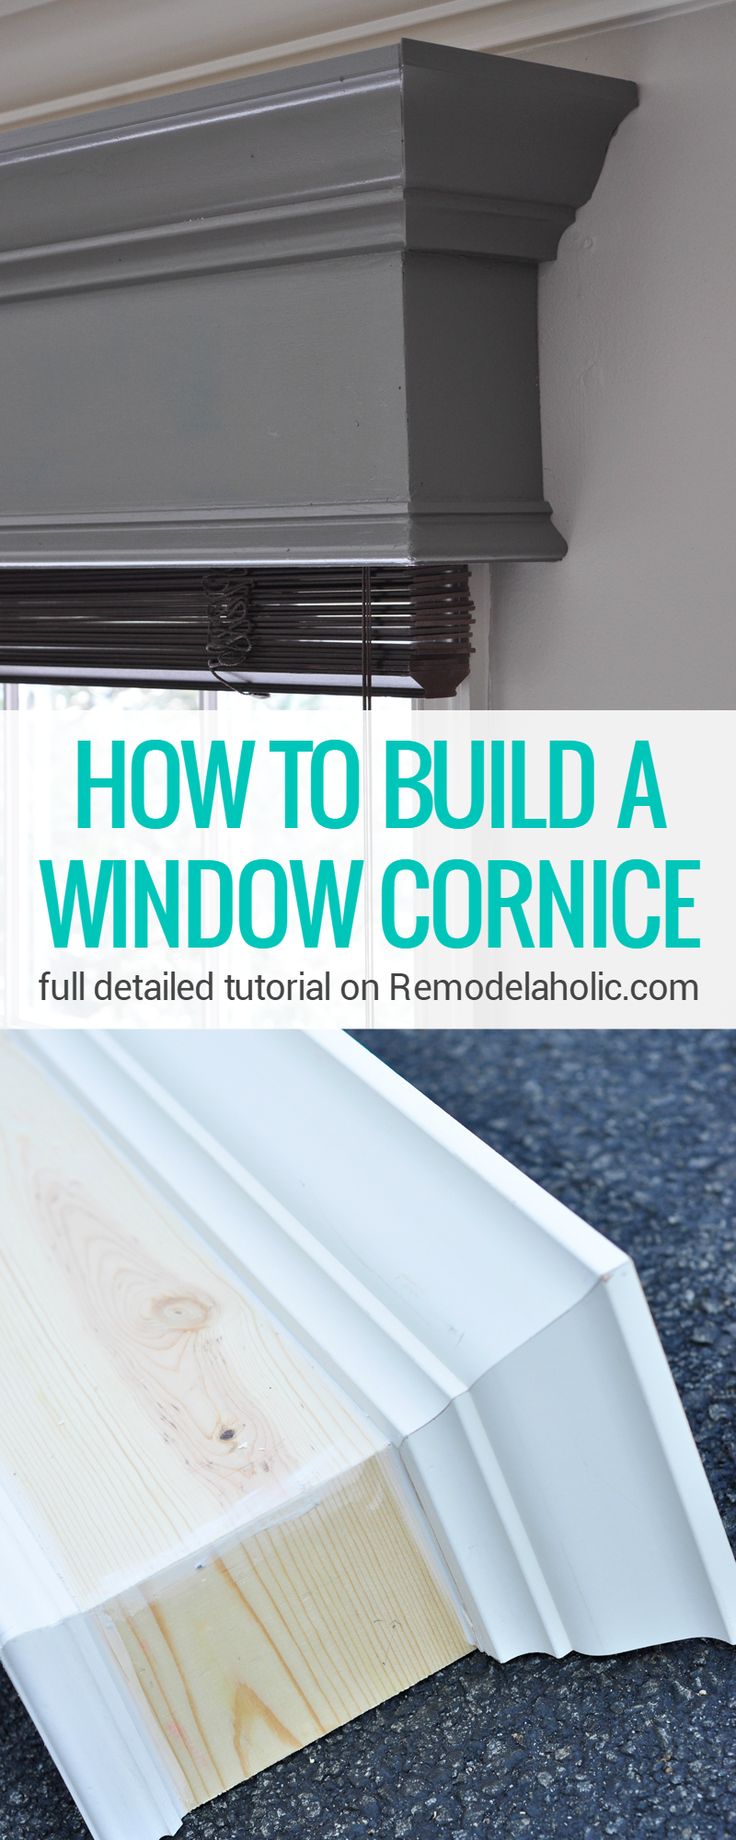 This DIY window cornice gives windows a MAJOR new look! Full detailed step-by-st...